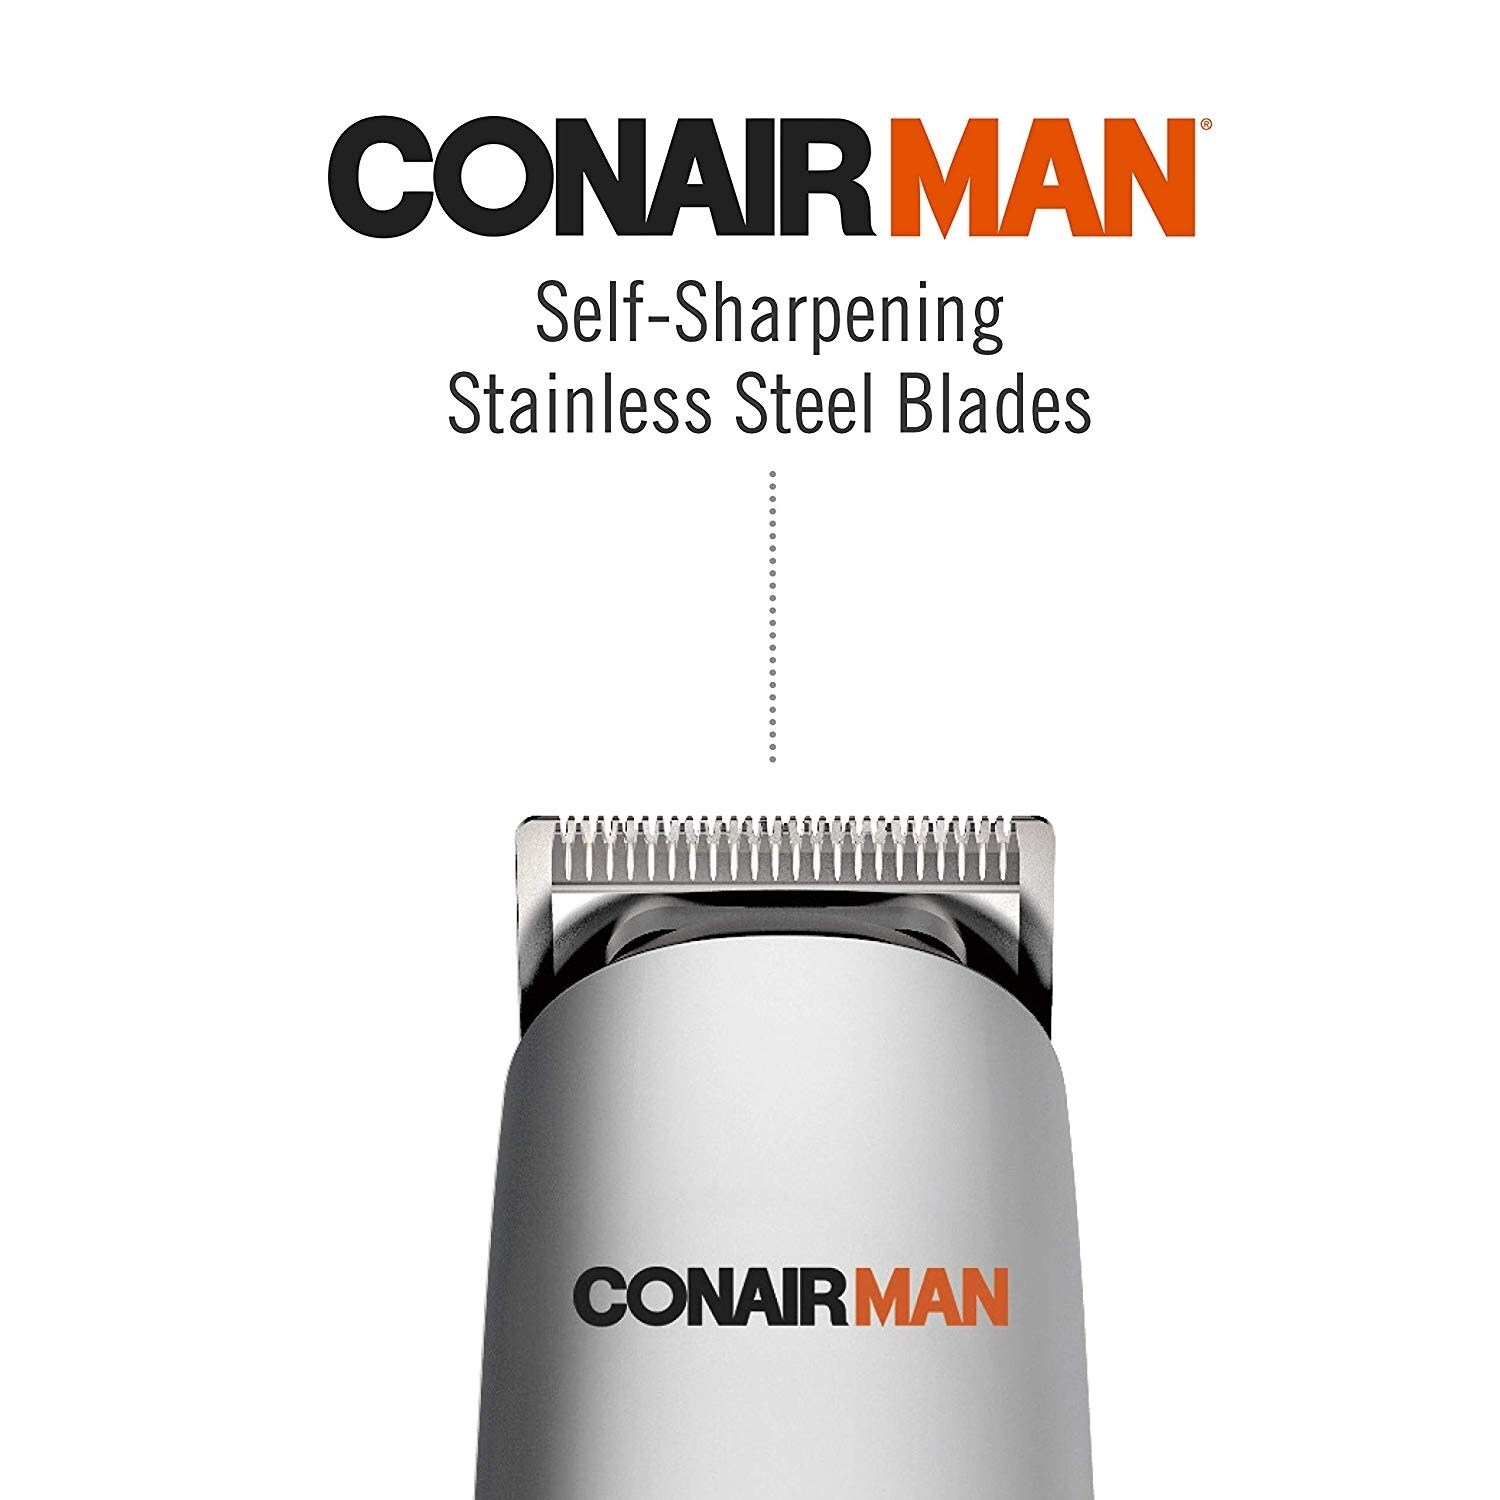 conair man all in 1 trimmer